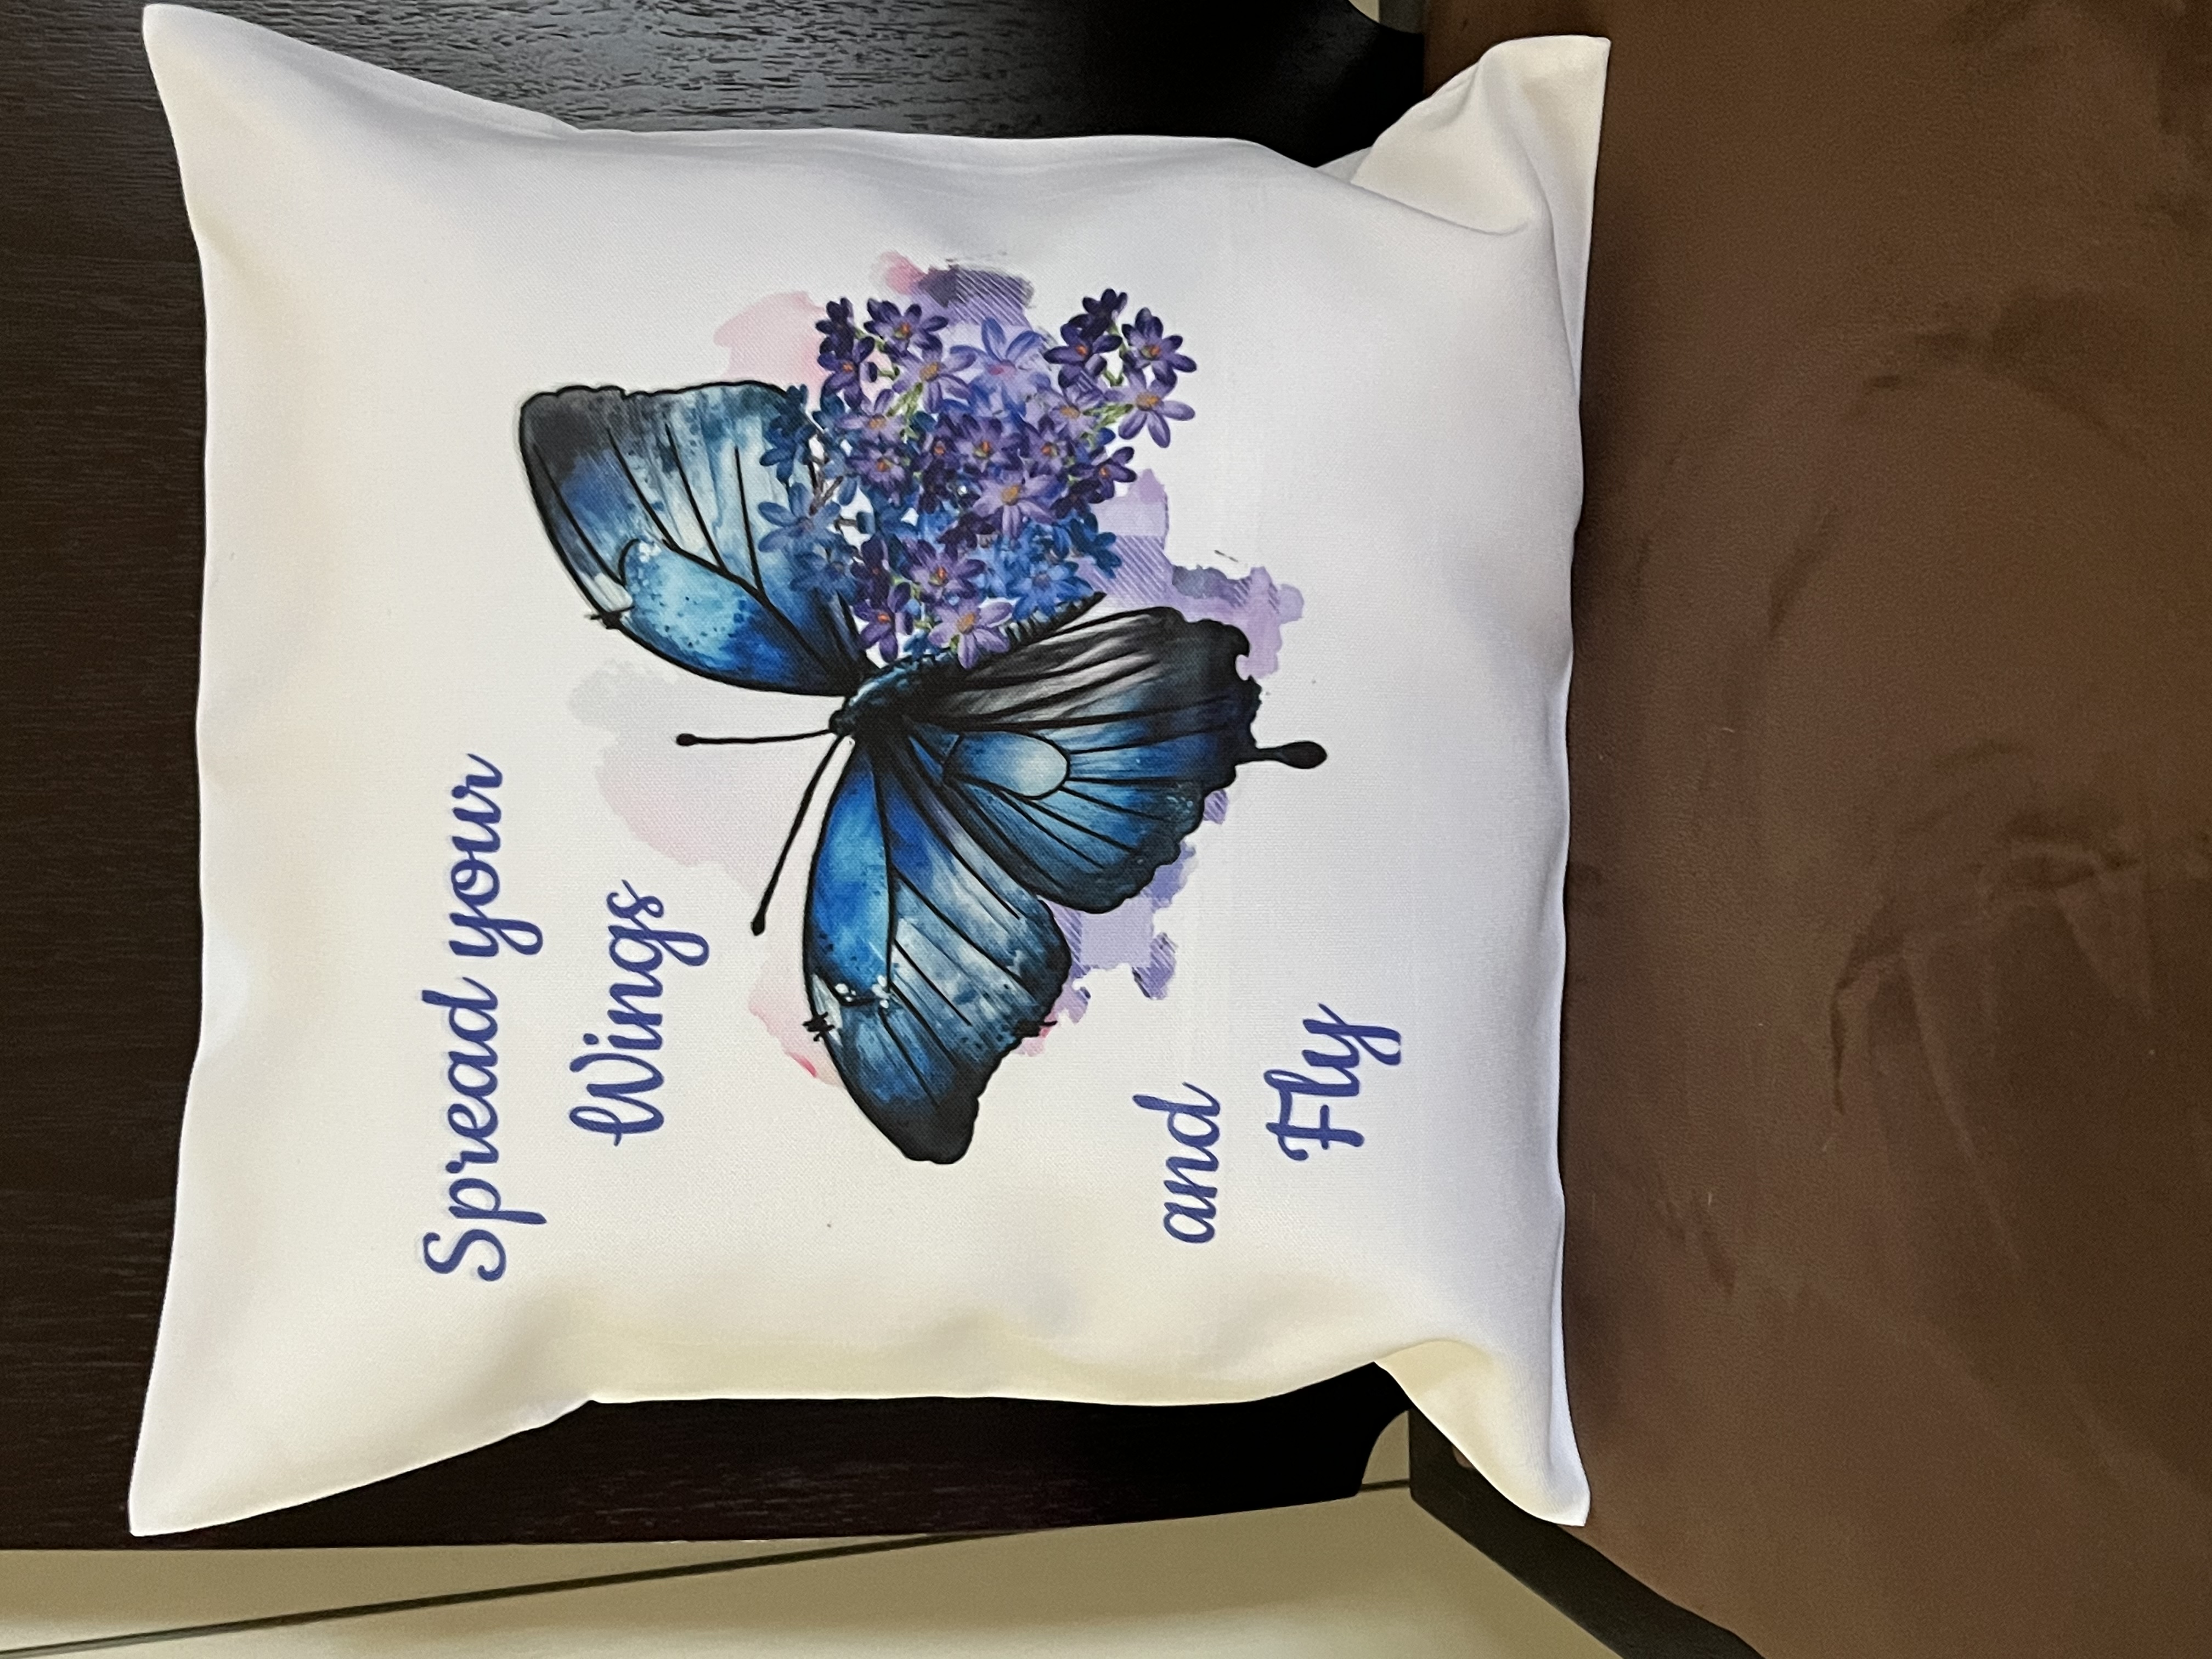 Spread your wings made with sublimation printing